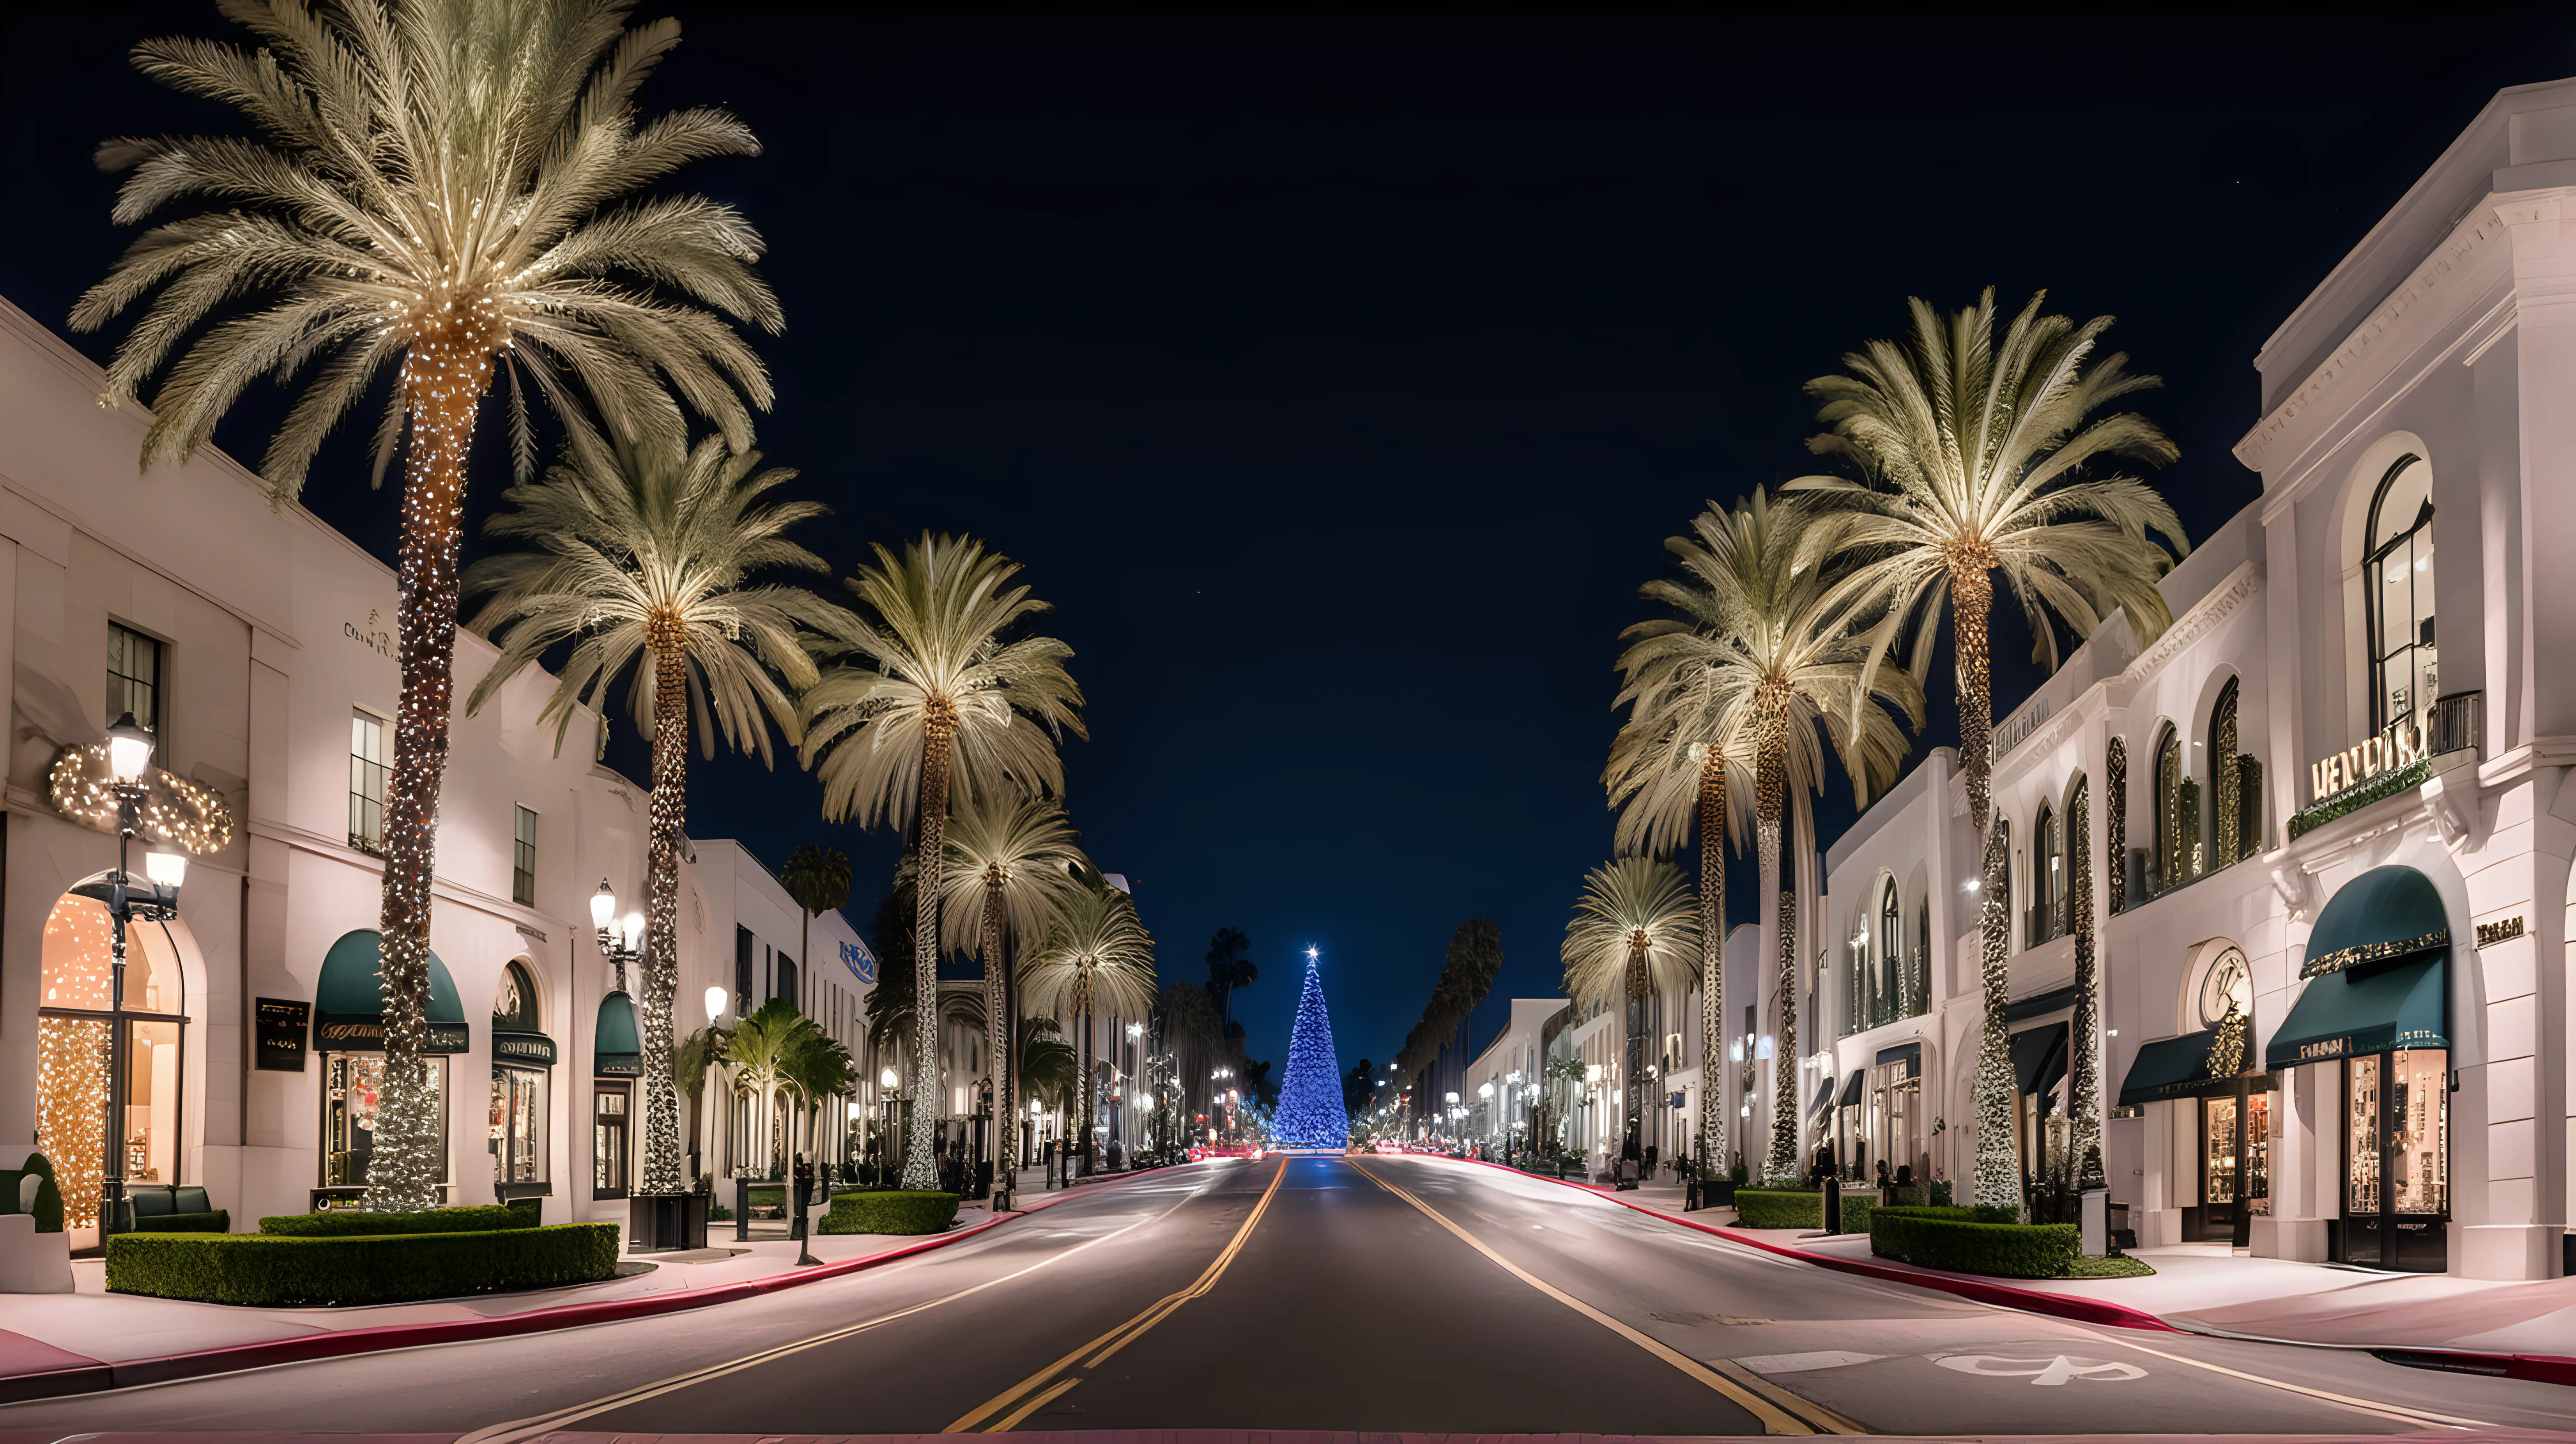 Glamorous Rodeo Drive Night Scene with Festive Christmas Lights